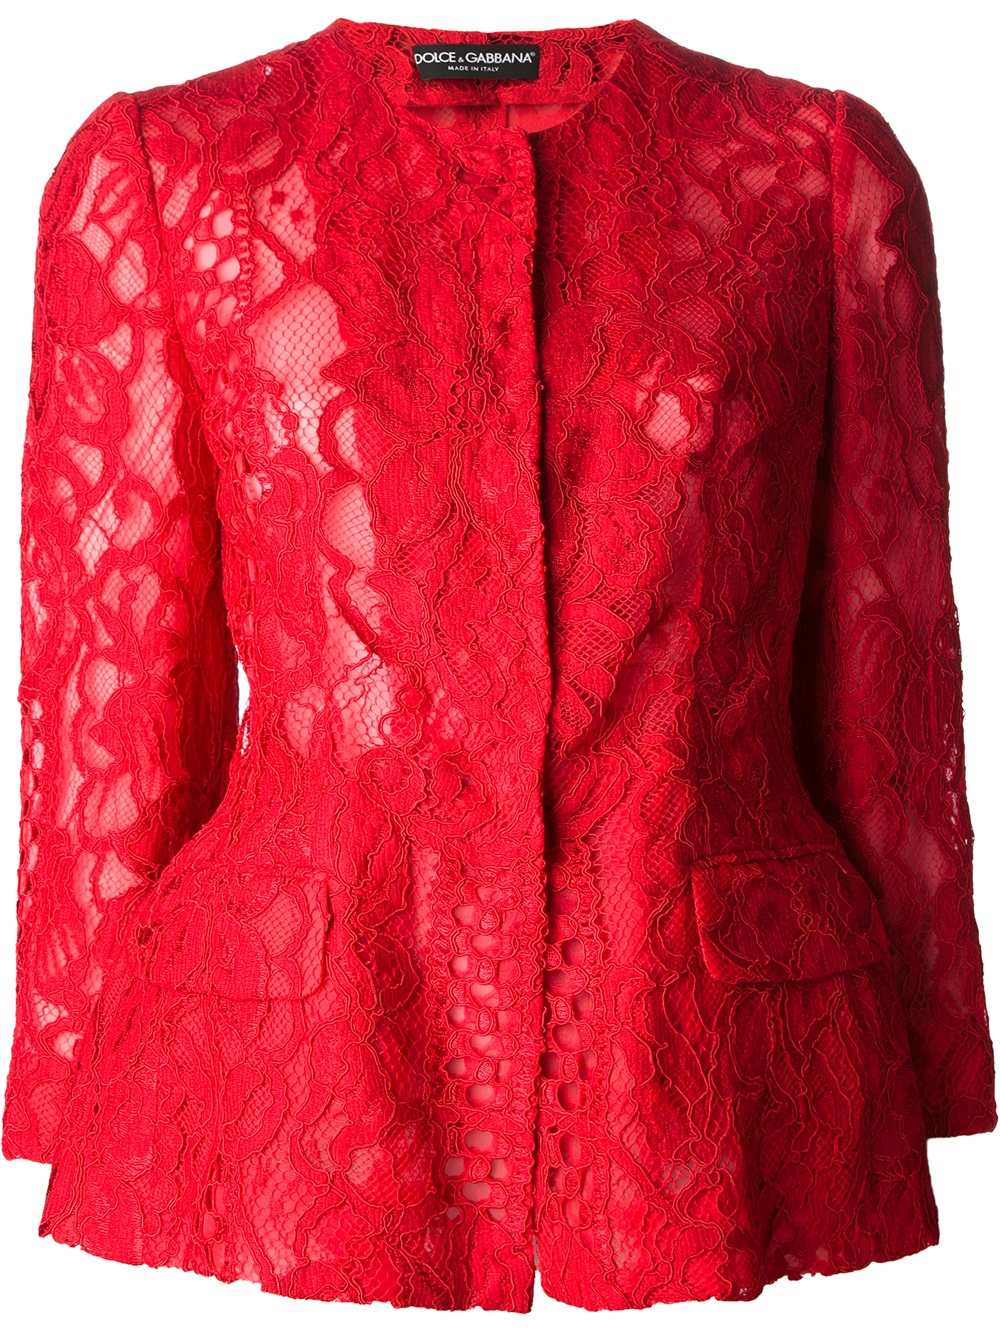 Lyst - Dolce & gabbana Floral Lace Peplum Jacket in Red